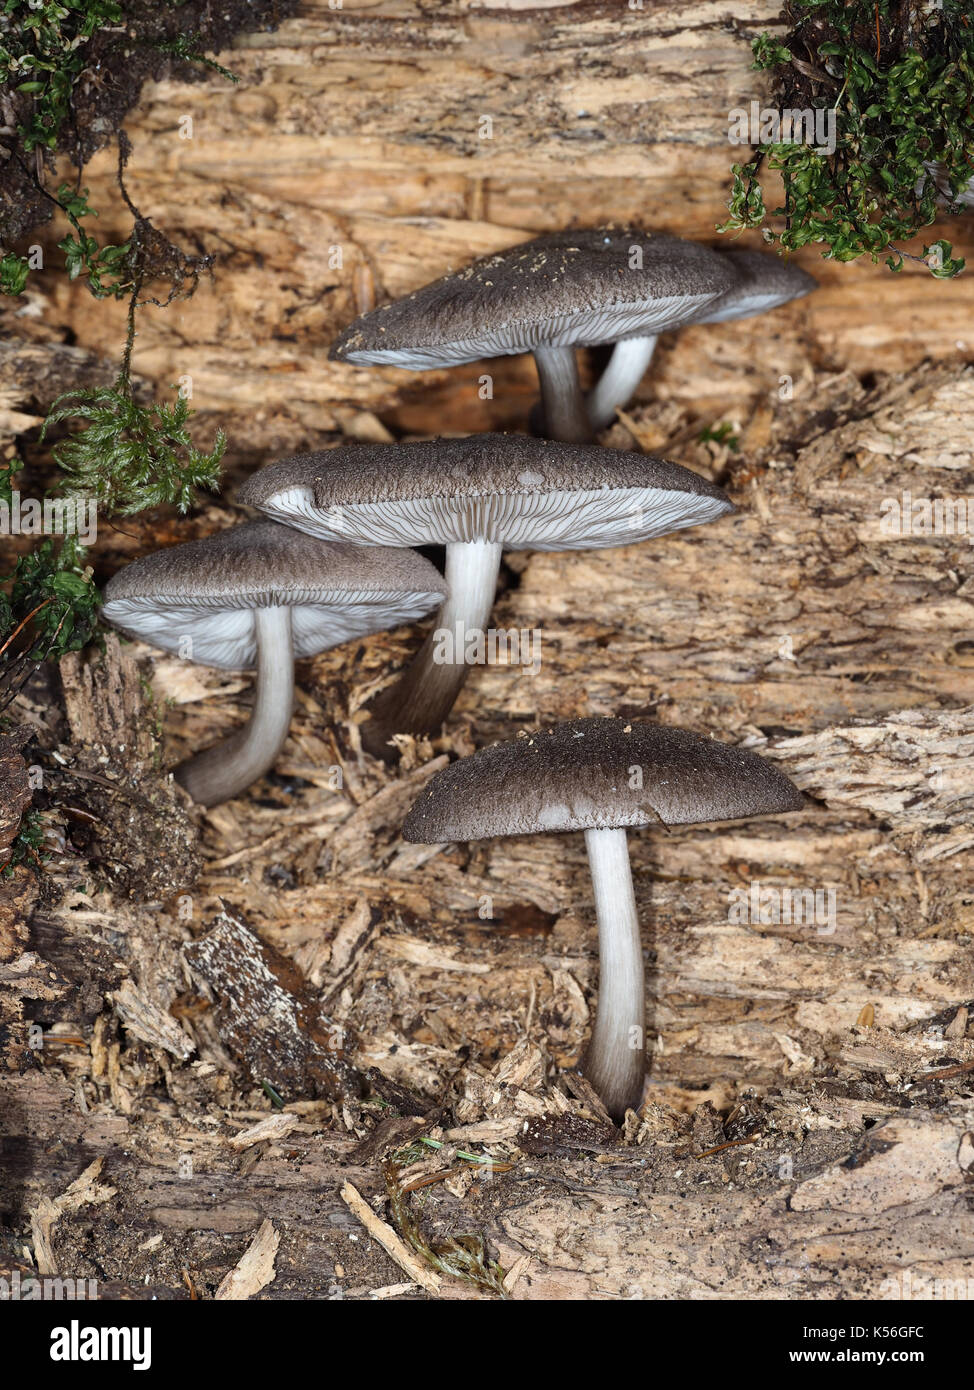 Unidentified mushrooms (possibly Pluteus sp.) growing from a rotten log in a forest in Western Washington state Stock Photo